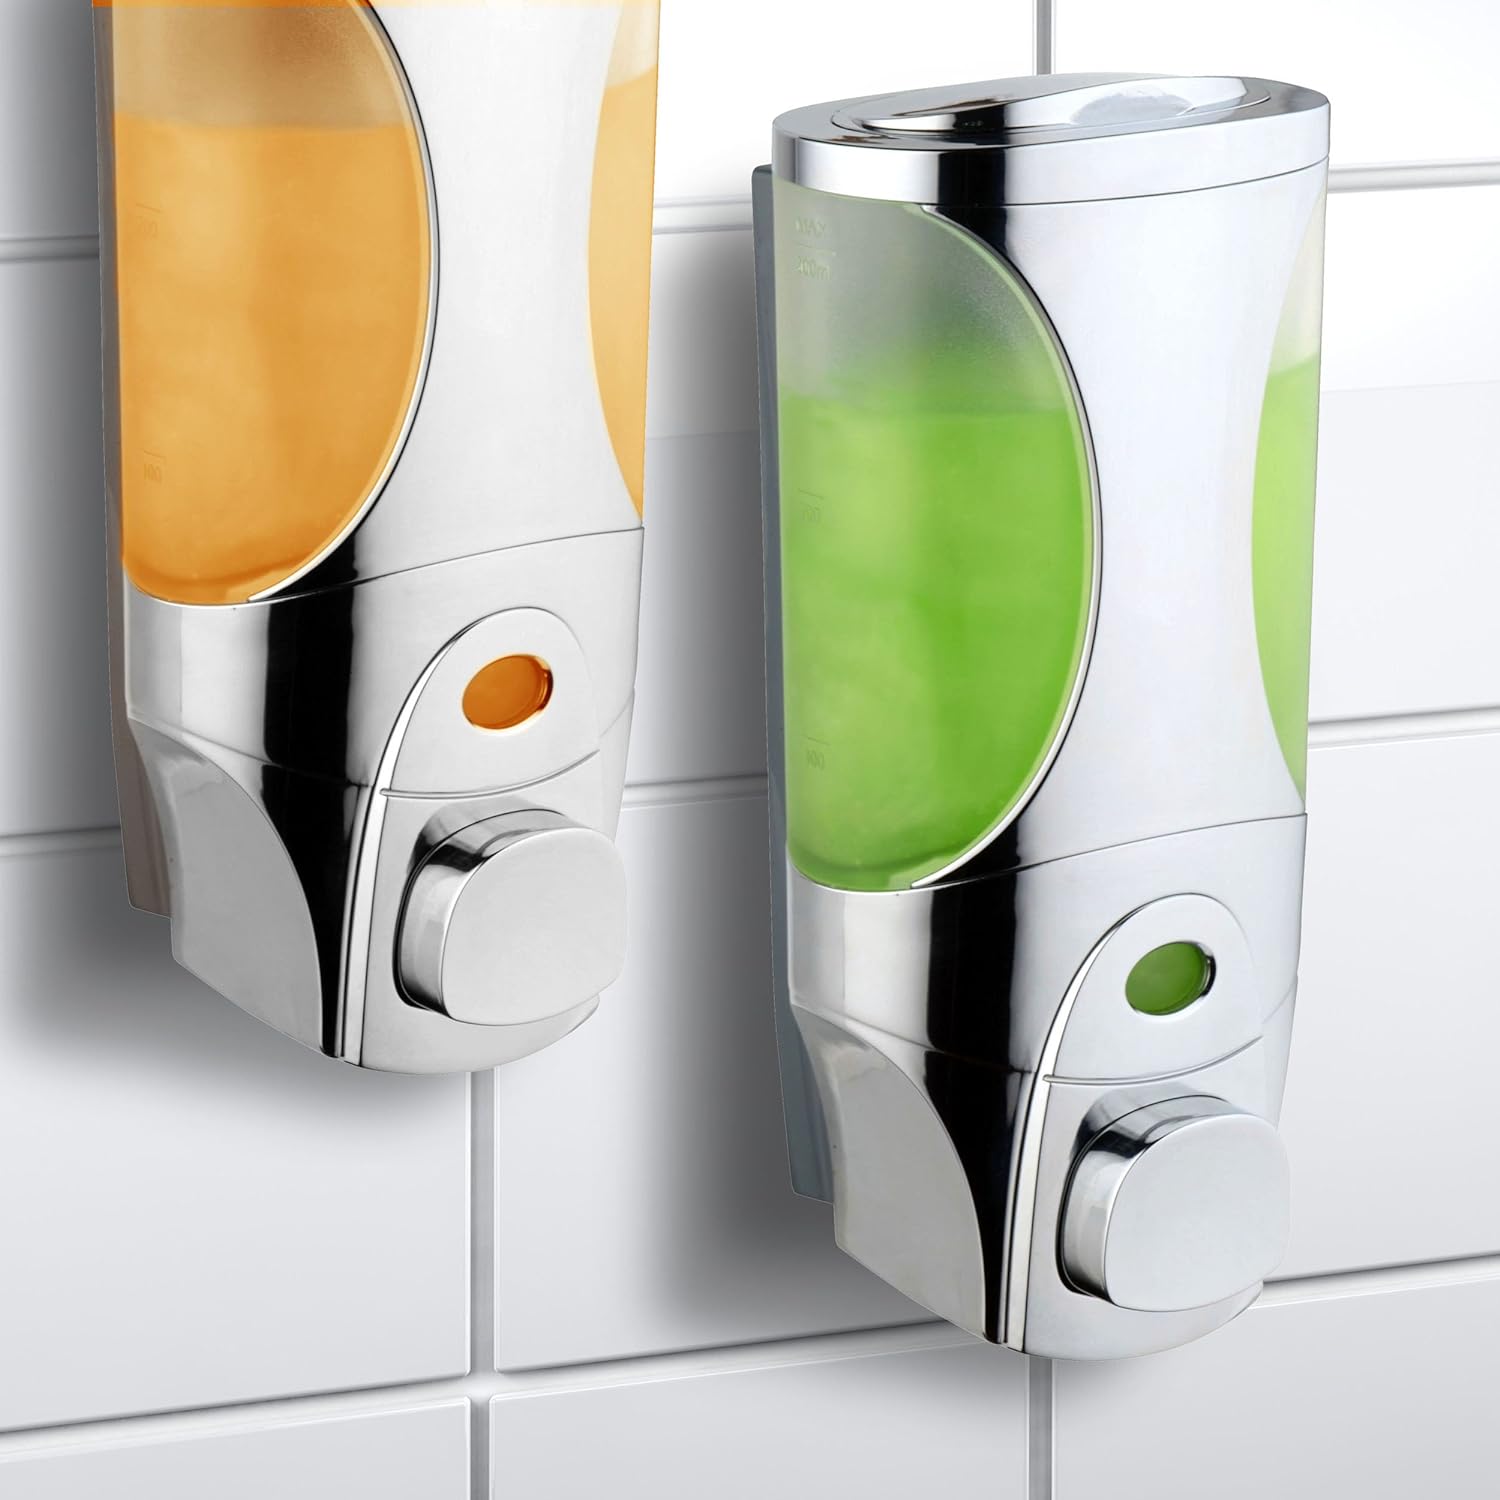 Hotelspa Curves Luxury Soap/Shampoo/Lotion Modular-design Shower Dispenser System by HotelSpa